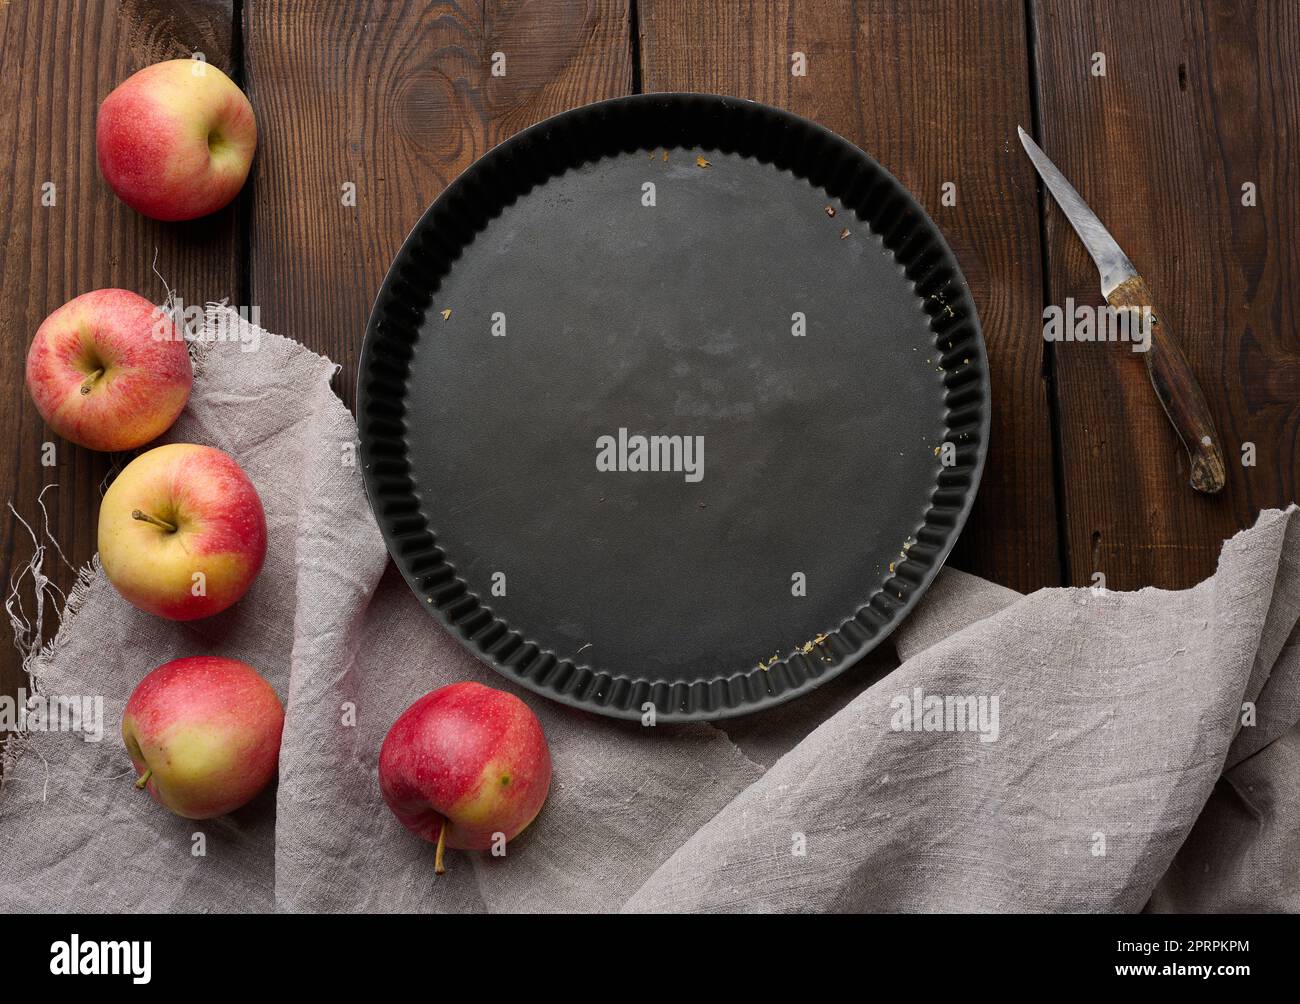 Empty black round non-stick cake pan on a brown wooden table Stock Photo